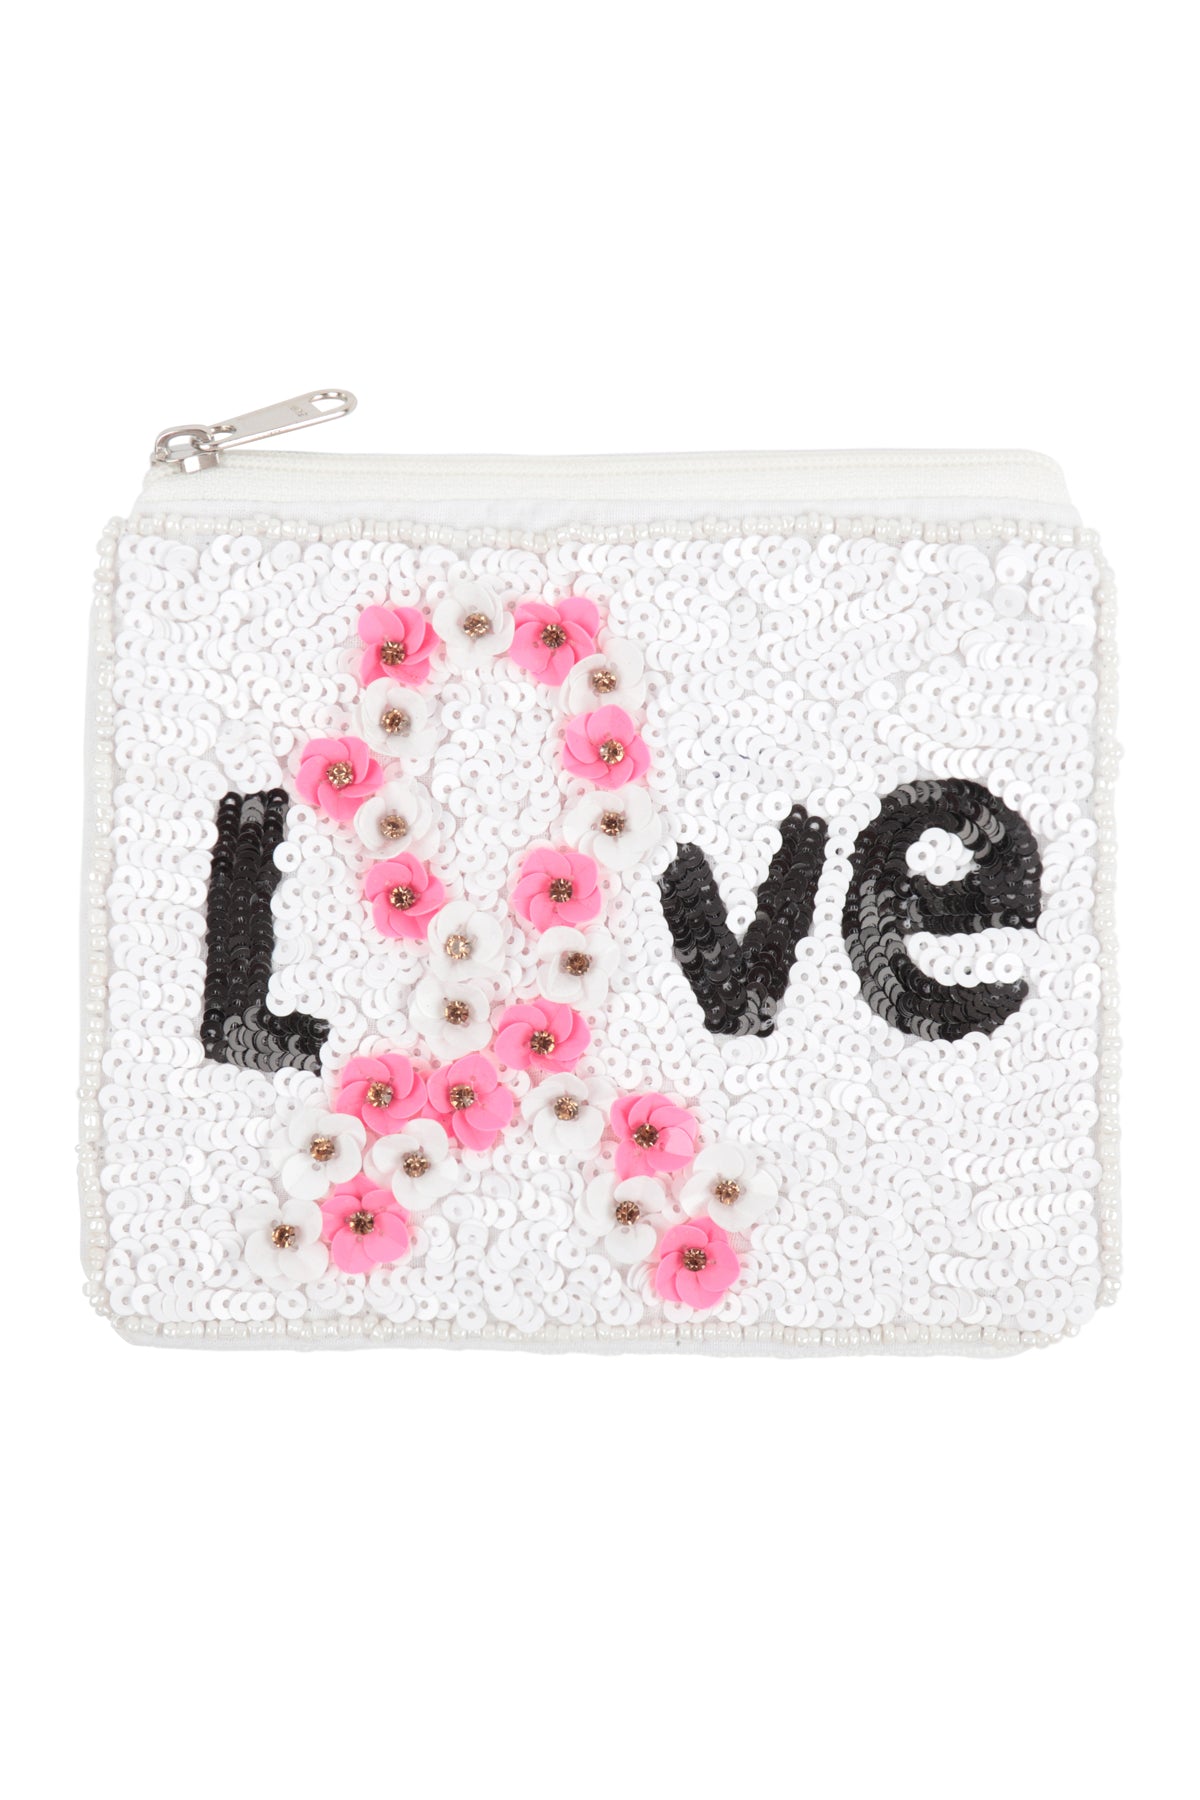 LOVE PINK RIBBON AWARENESS WITH FLOWERS SEQUIN COIN POUCH-WHITE